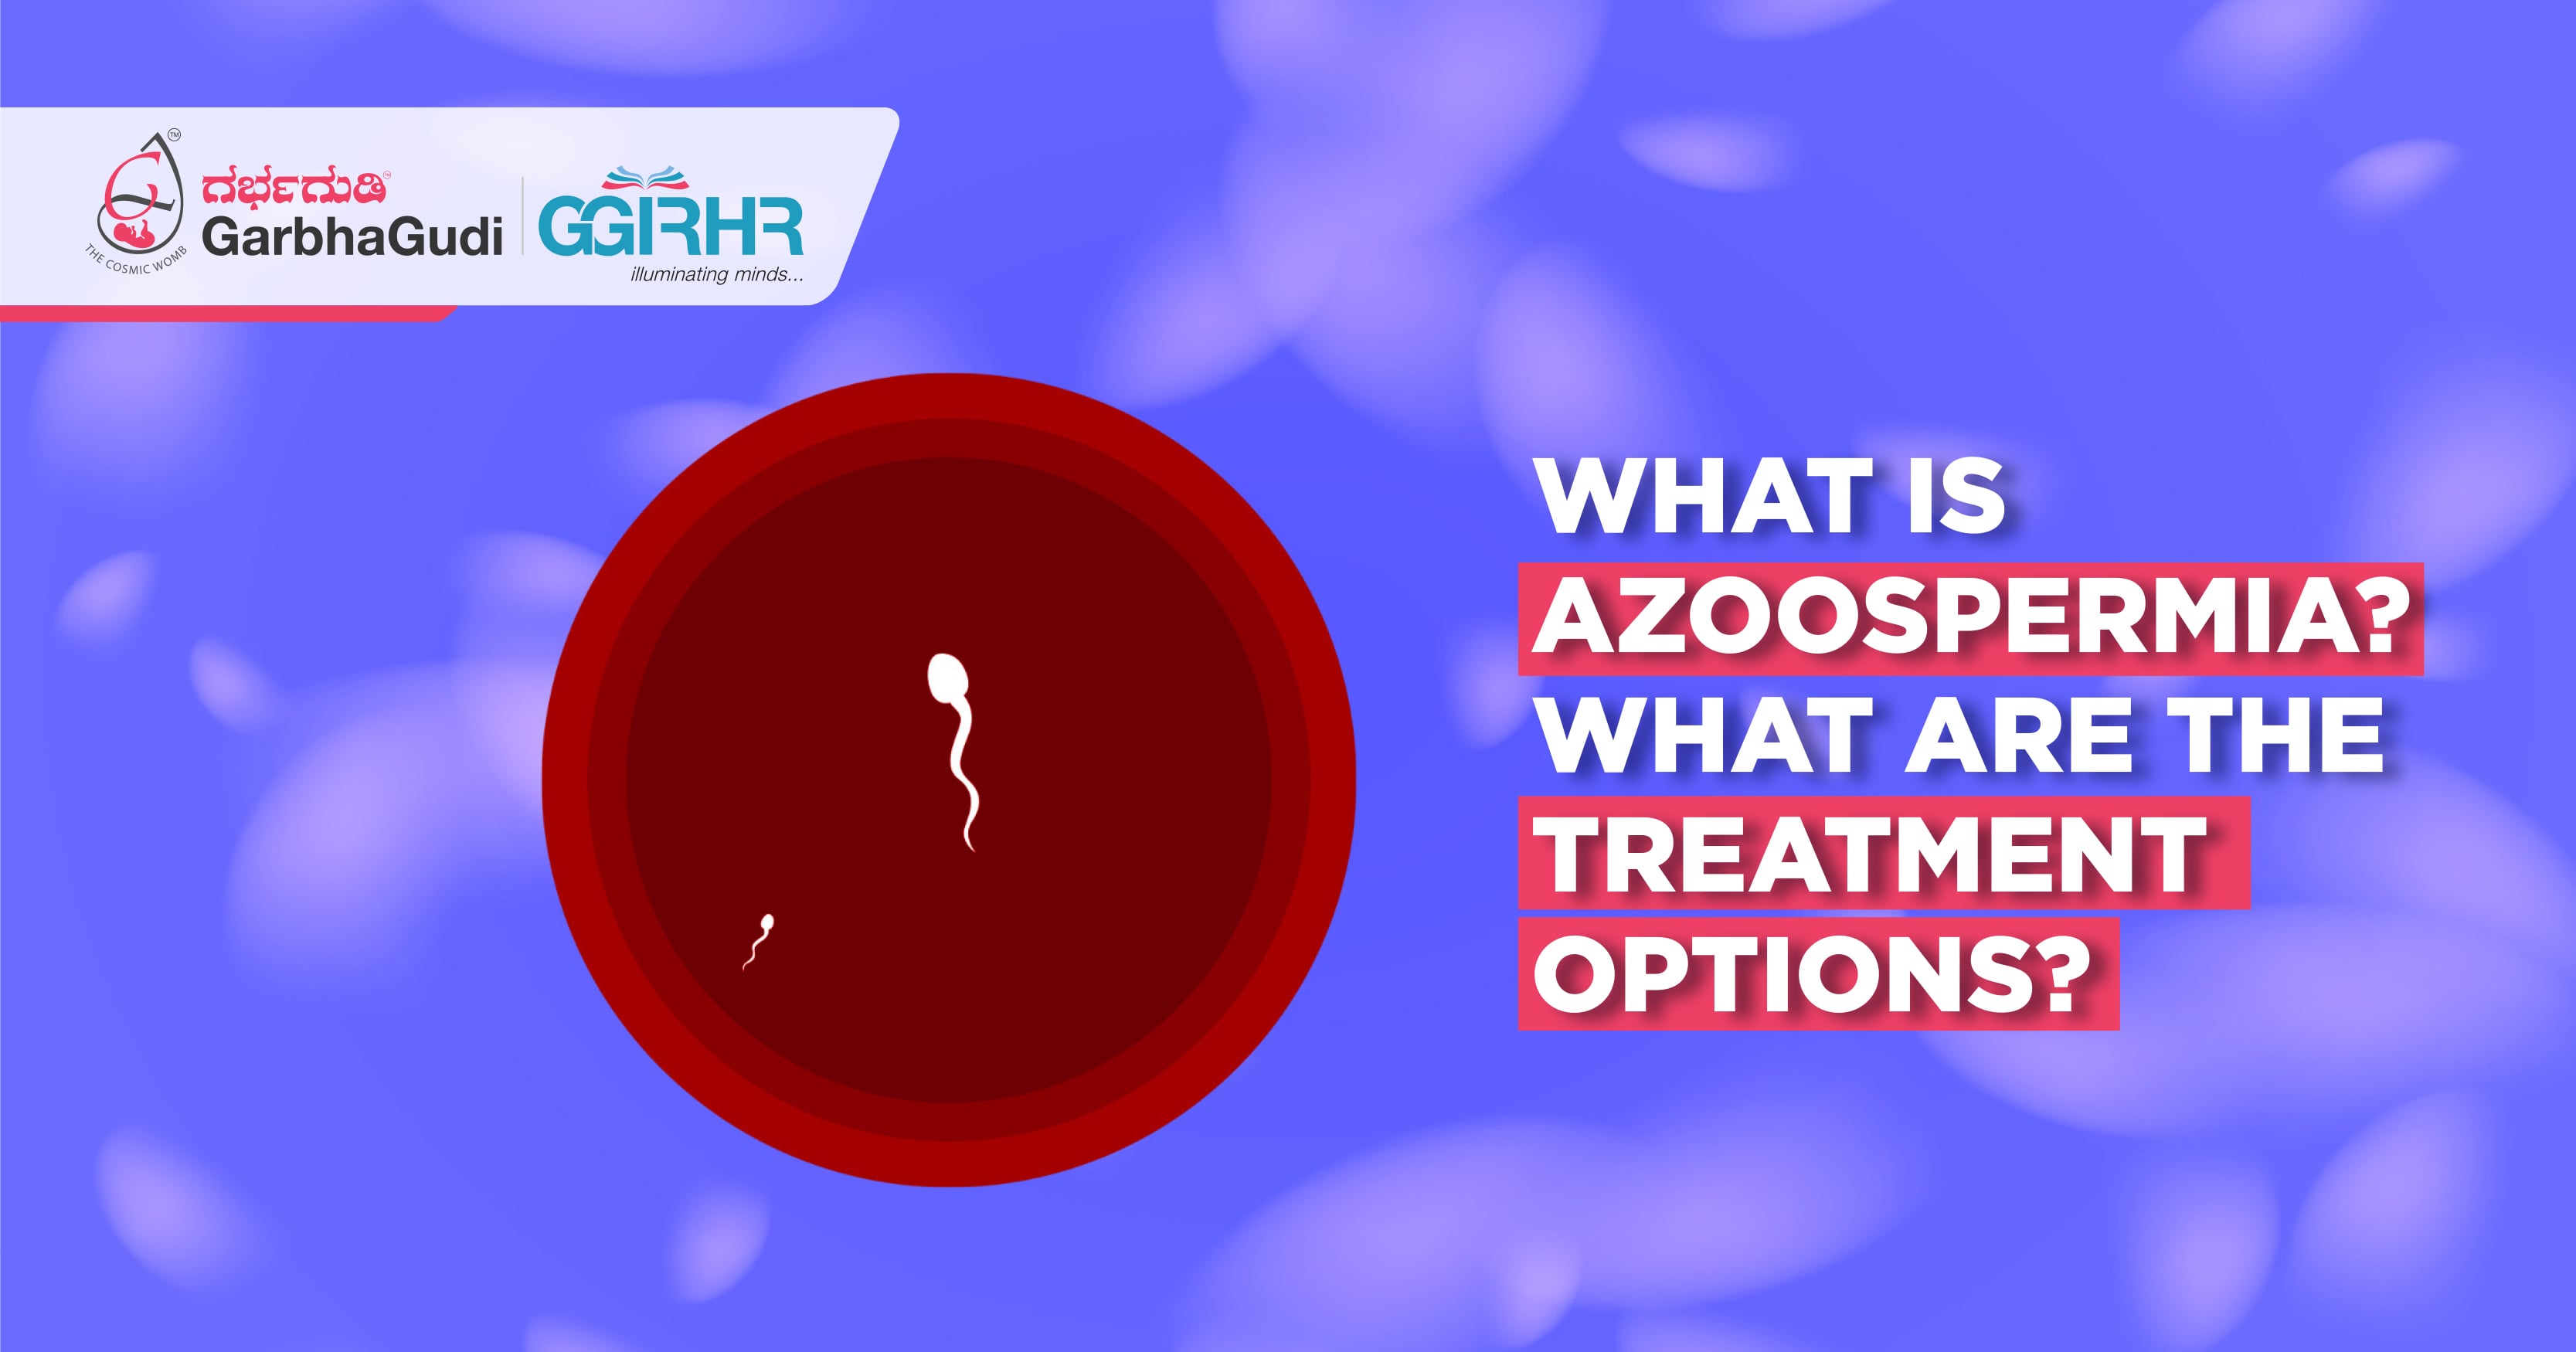 What Is Azoospermia? What Are the Treatment Options?